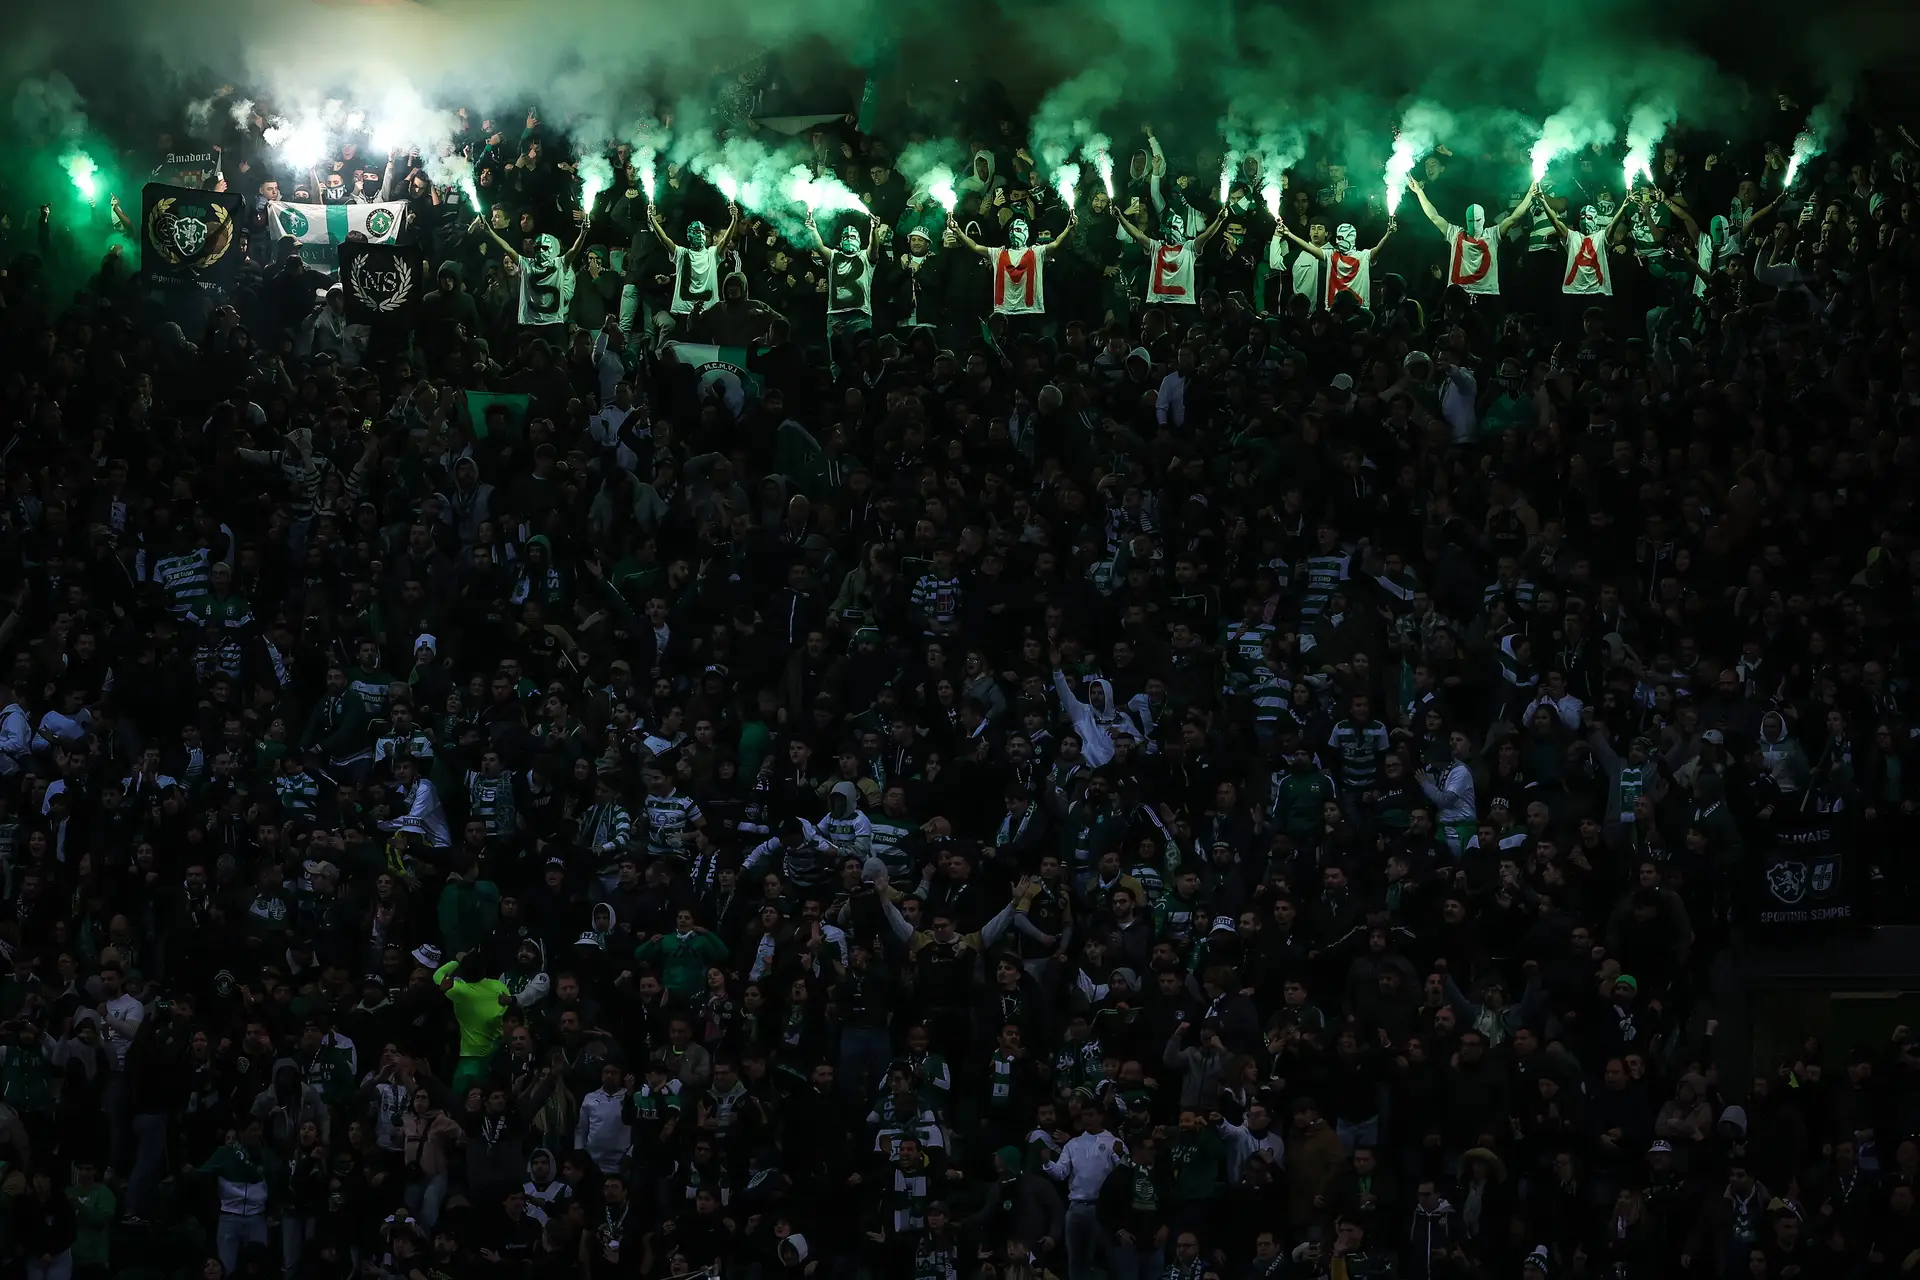 Clashes in Alvalade between fans force police to intervene